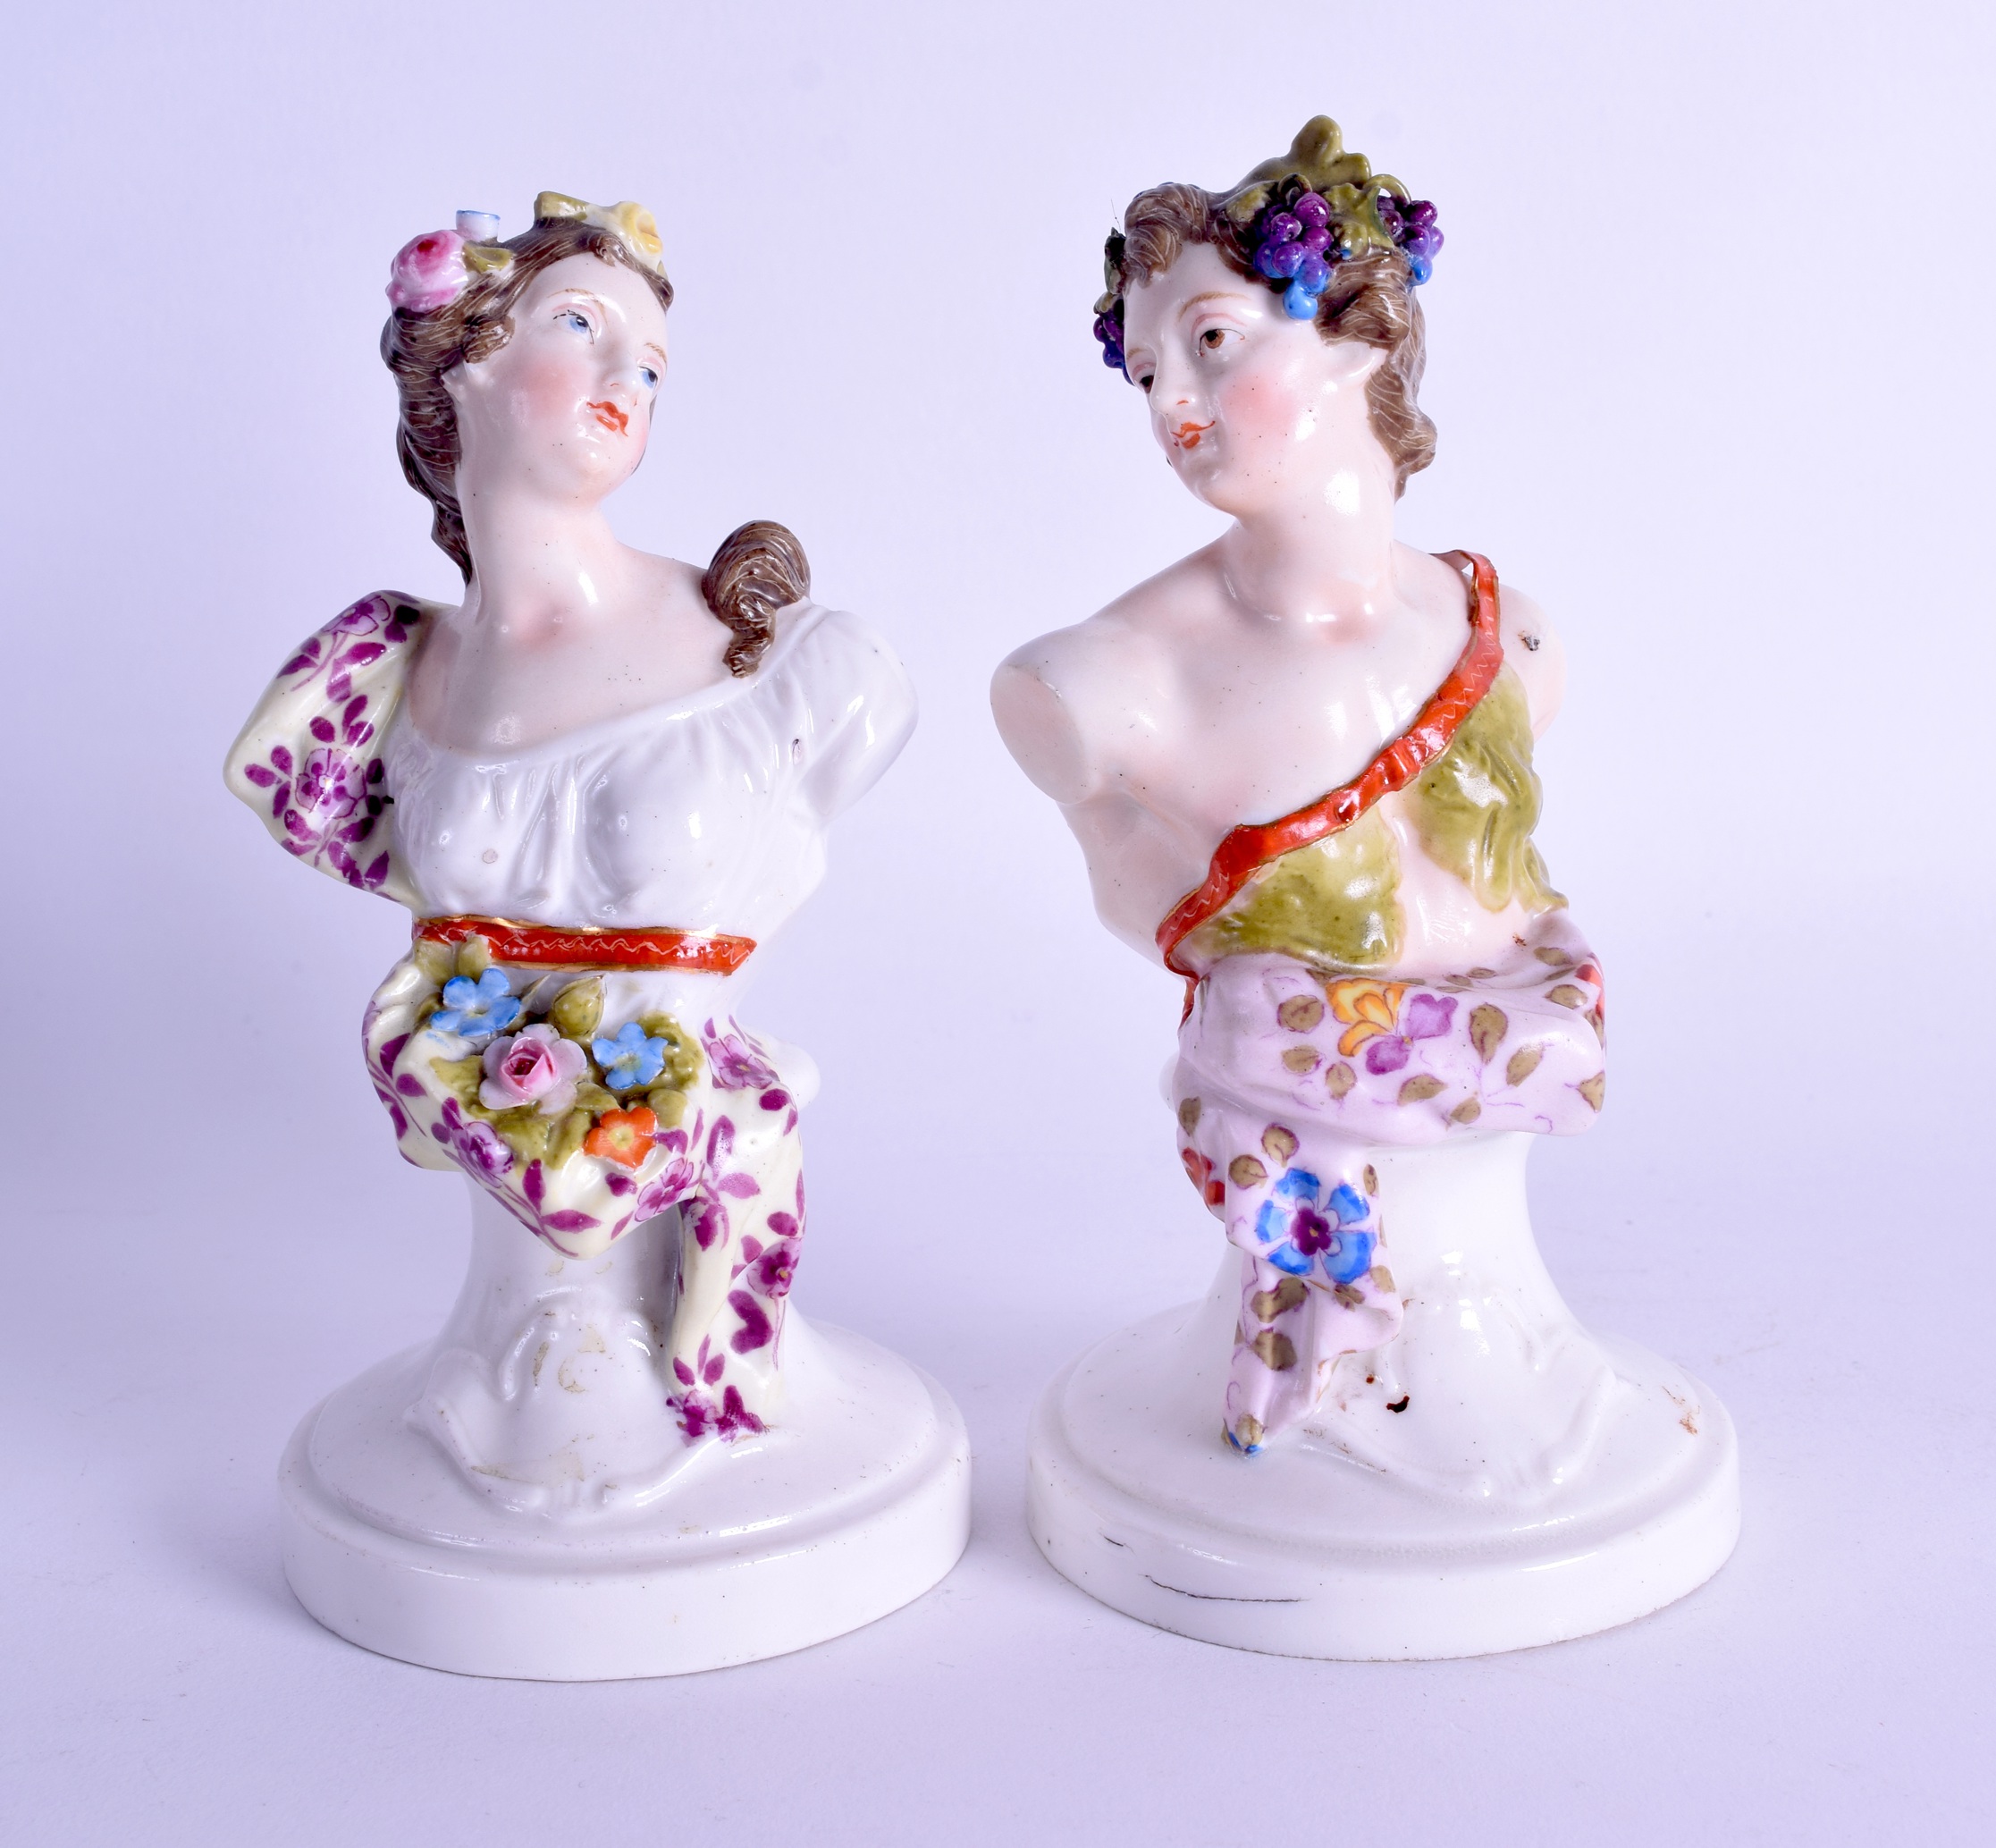 A PAIR OF 19TH CENTURY GERMAN PORCELAIN FIGURAL BUSTS painted with foliage and vines. 15 cm high.